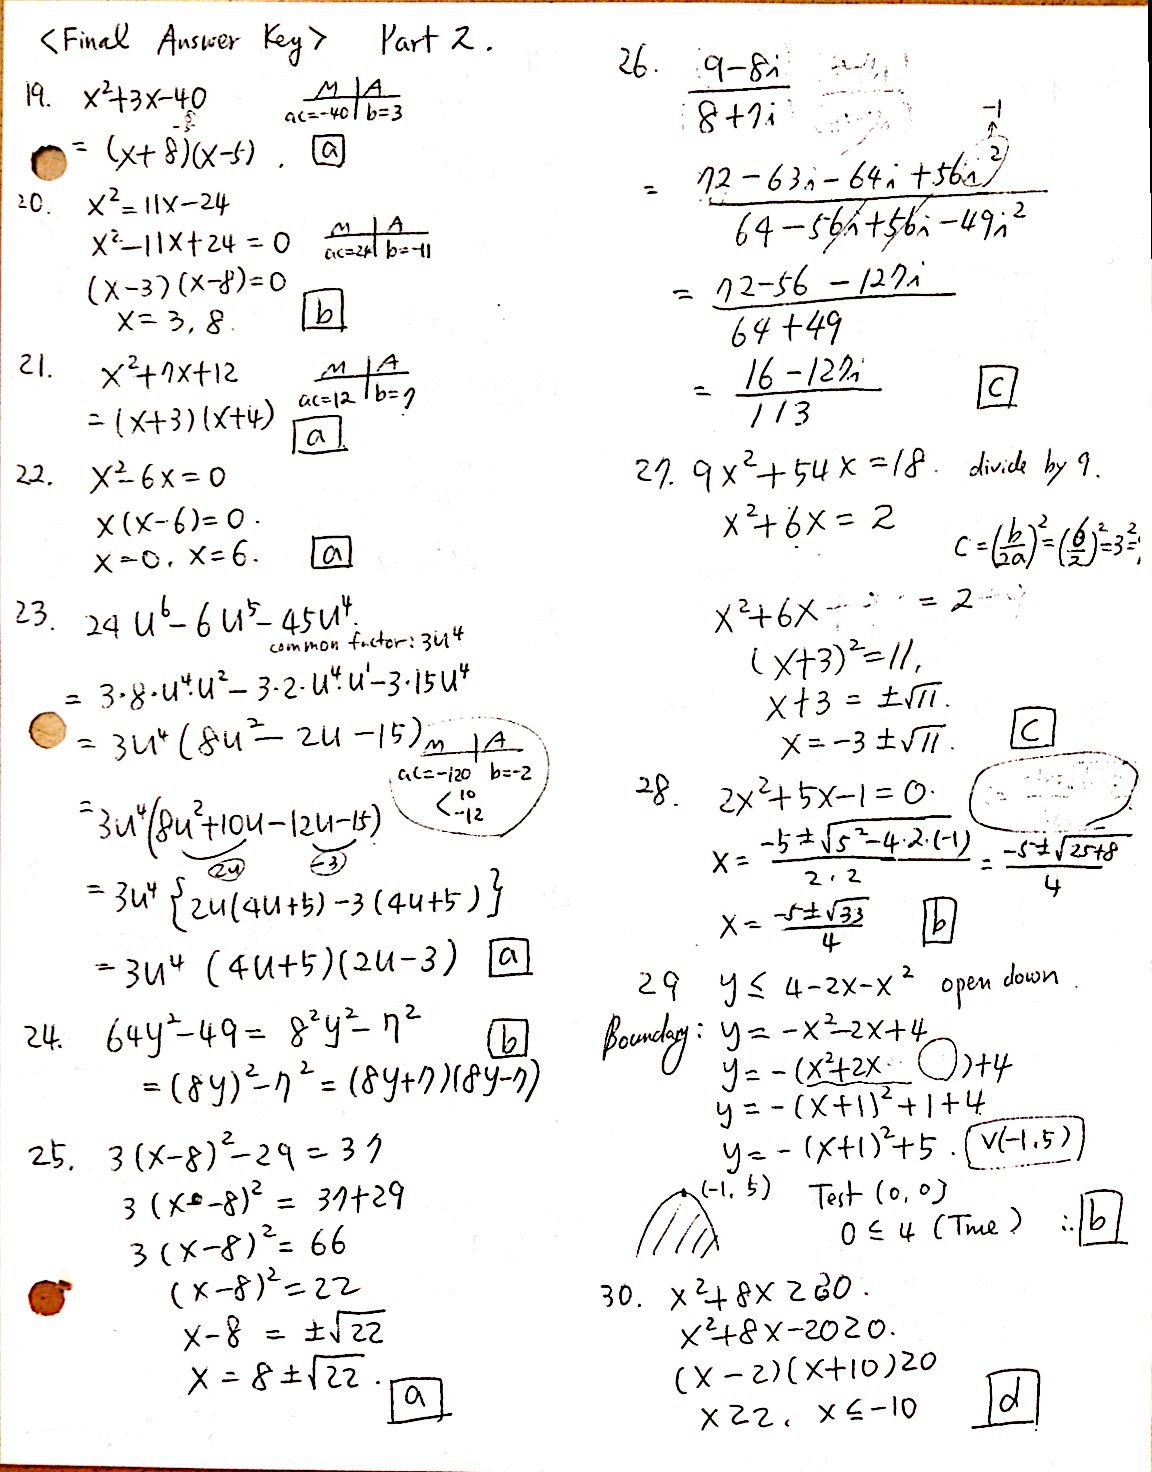 Free Algebra worksheets pdf) with answer keys includes visual aides, model problems, exploratory activities, practice problems, and an online component.